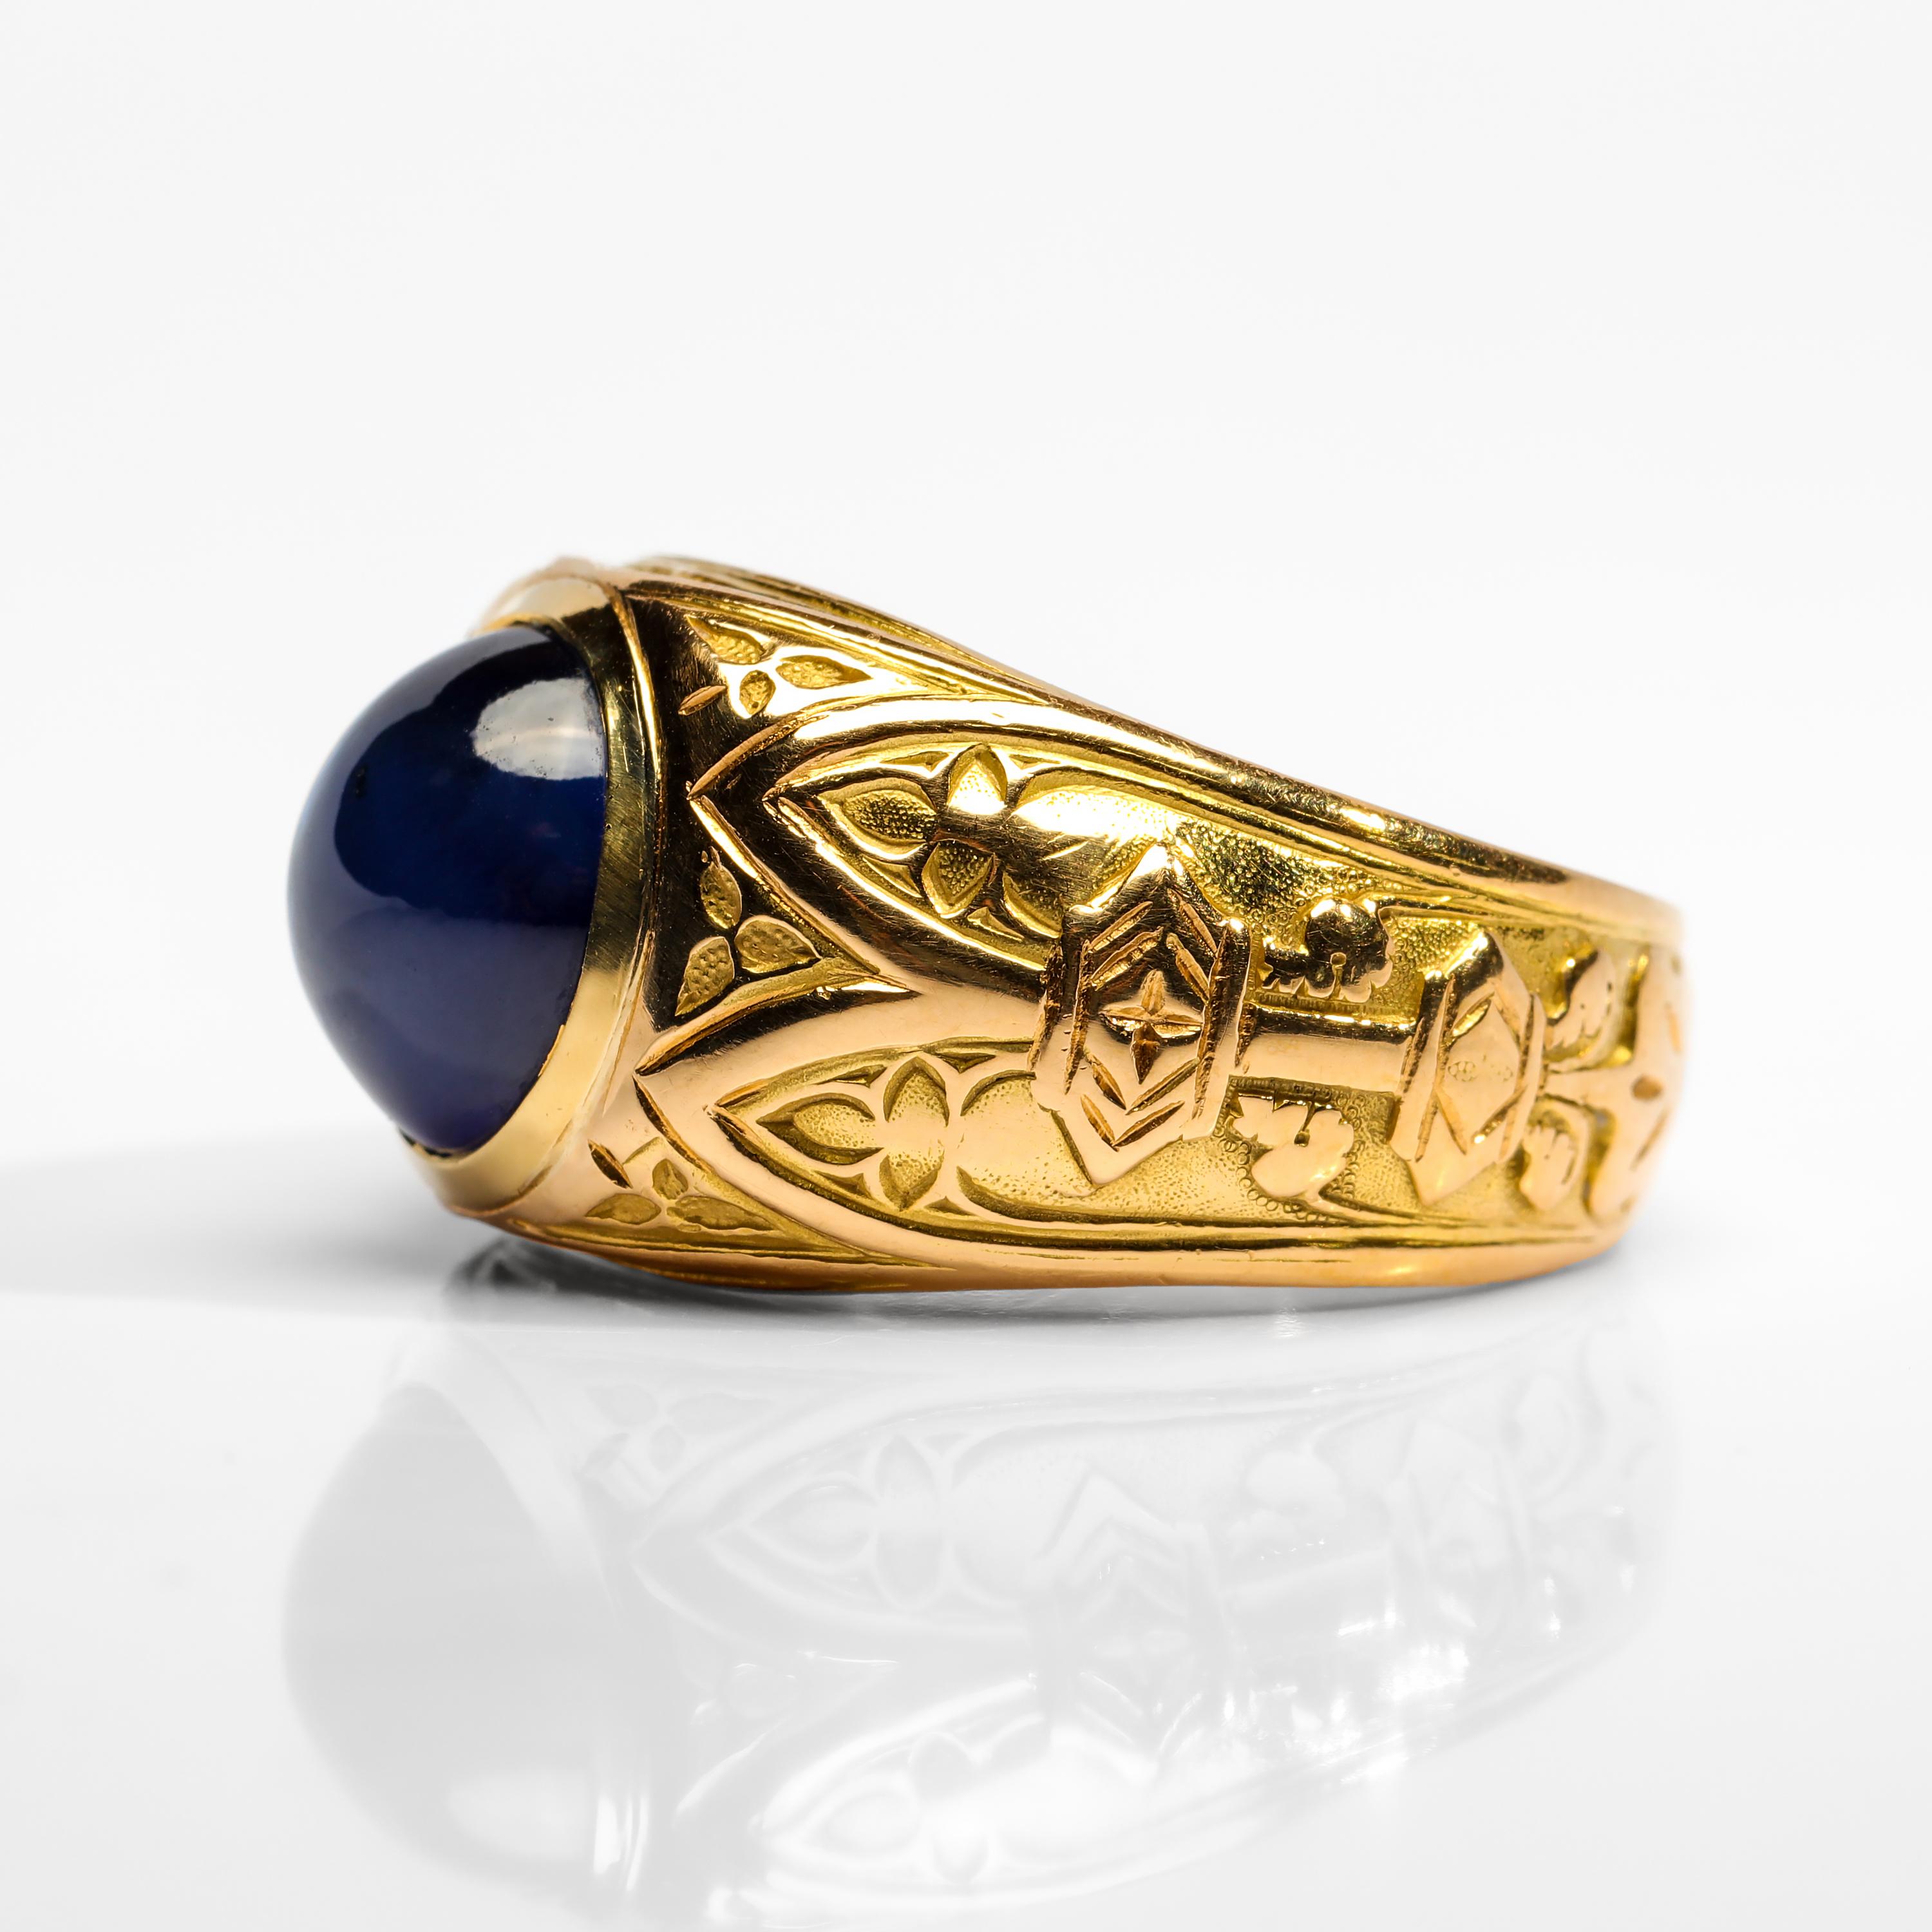 Tiffany & Co. Gilded Age Men's Sapphire Ring as Featured in the New York Times 2